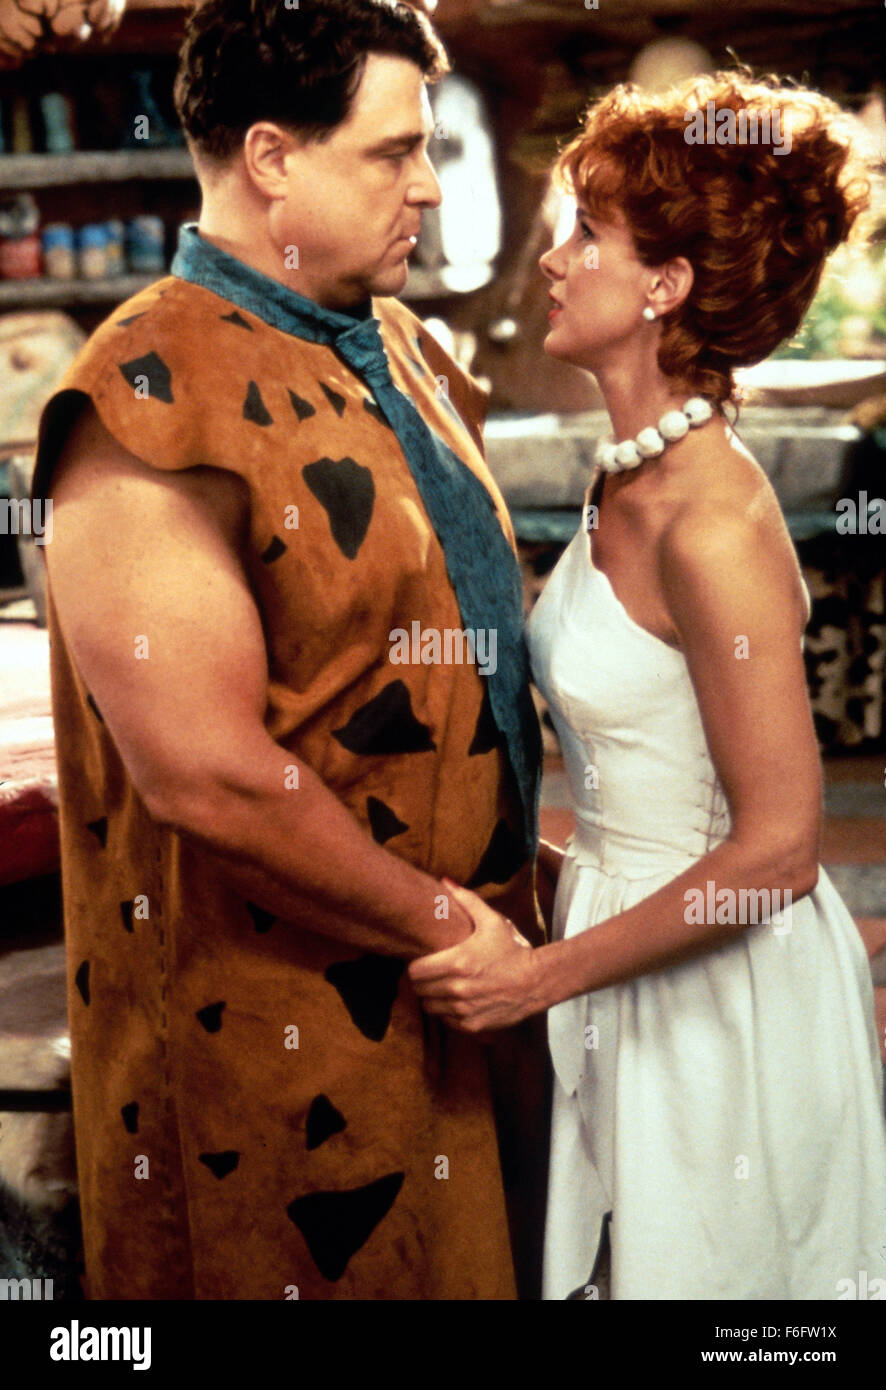 May 27, 1994; Hollywood, CA, USA; JOHN GOODMAN as Fred Flintstone and ELIZABETH PERKINS as Wilma Flintstone in the family, fantasy, comedy ''The Flintstones'' directed by Brian Levant. Stock Photo